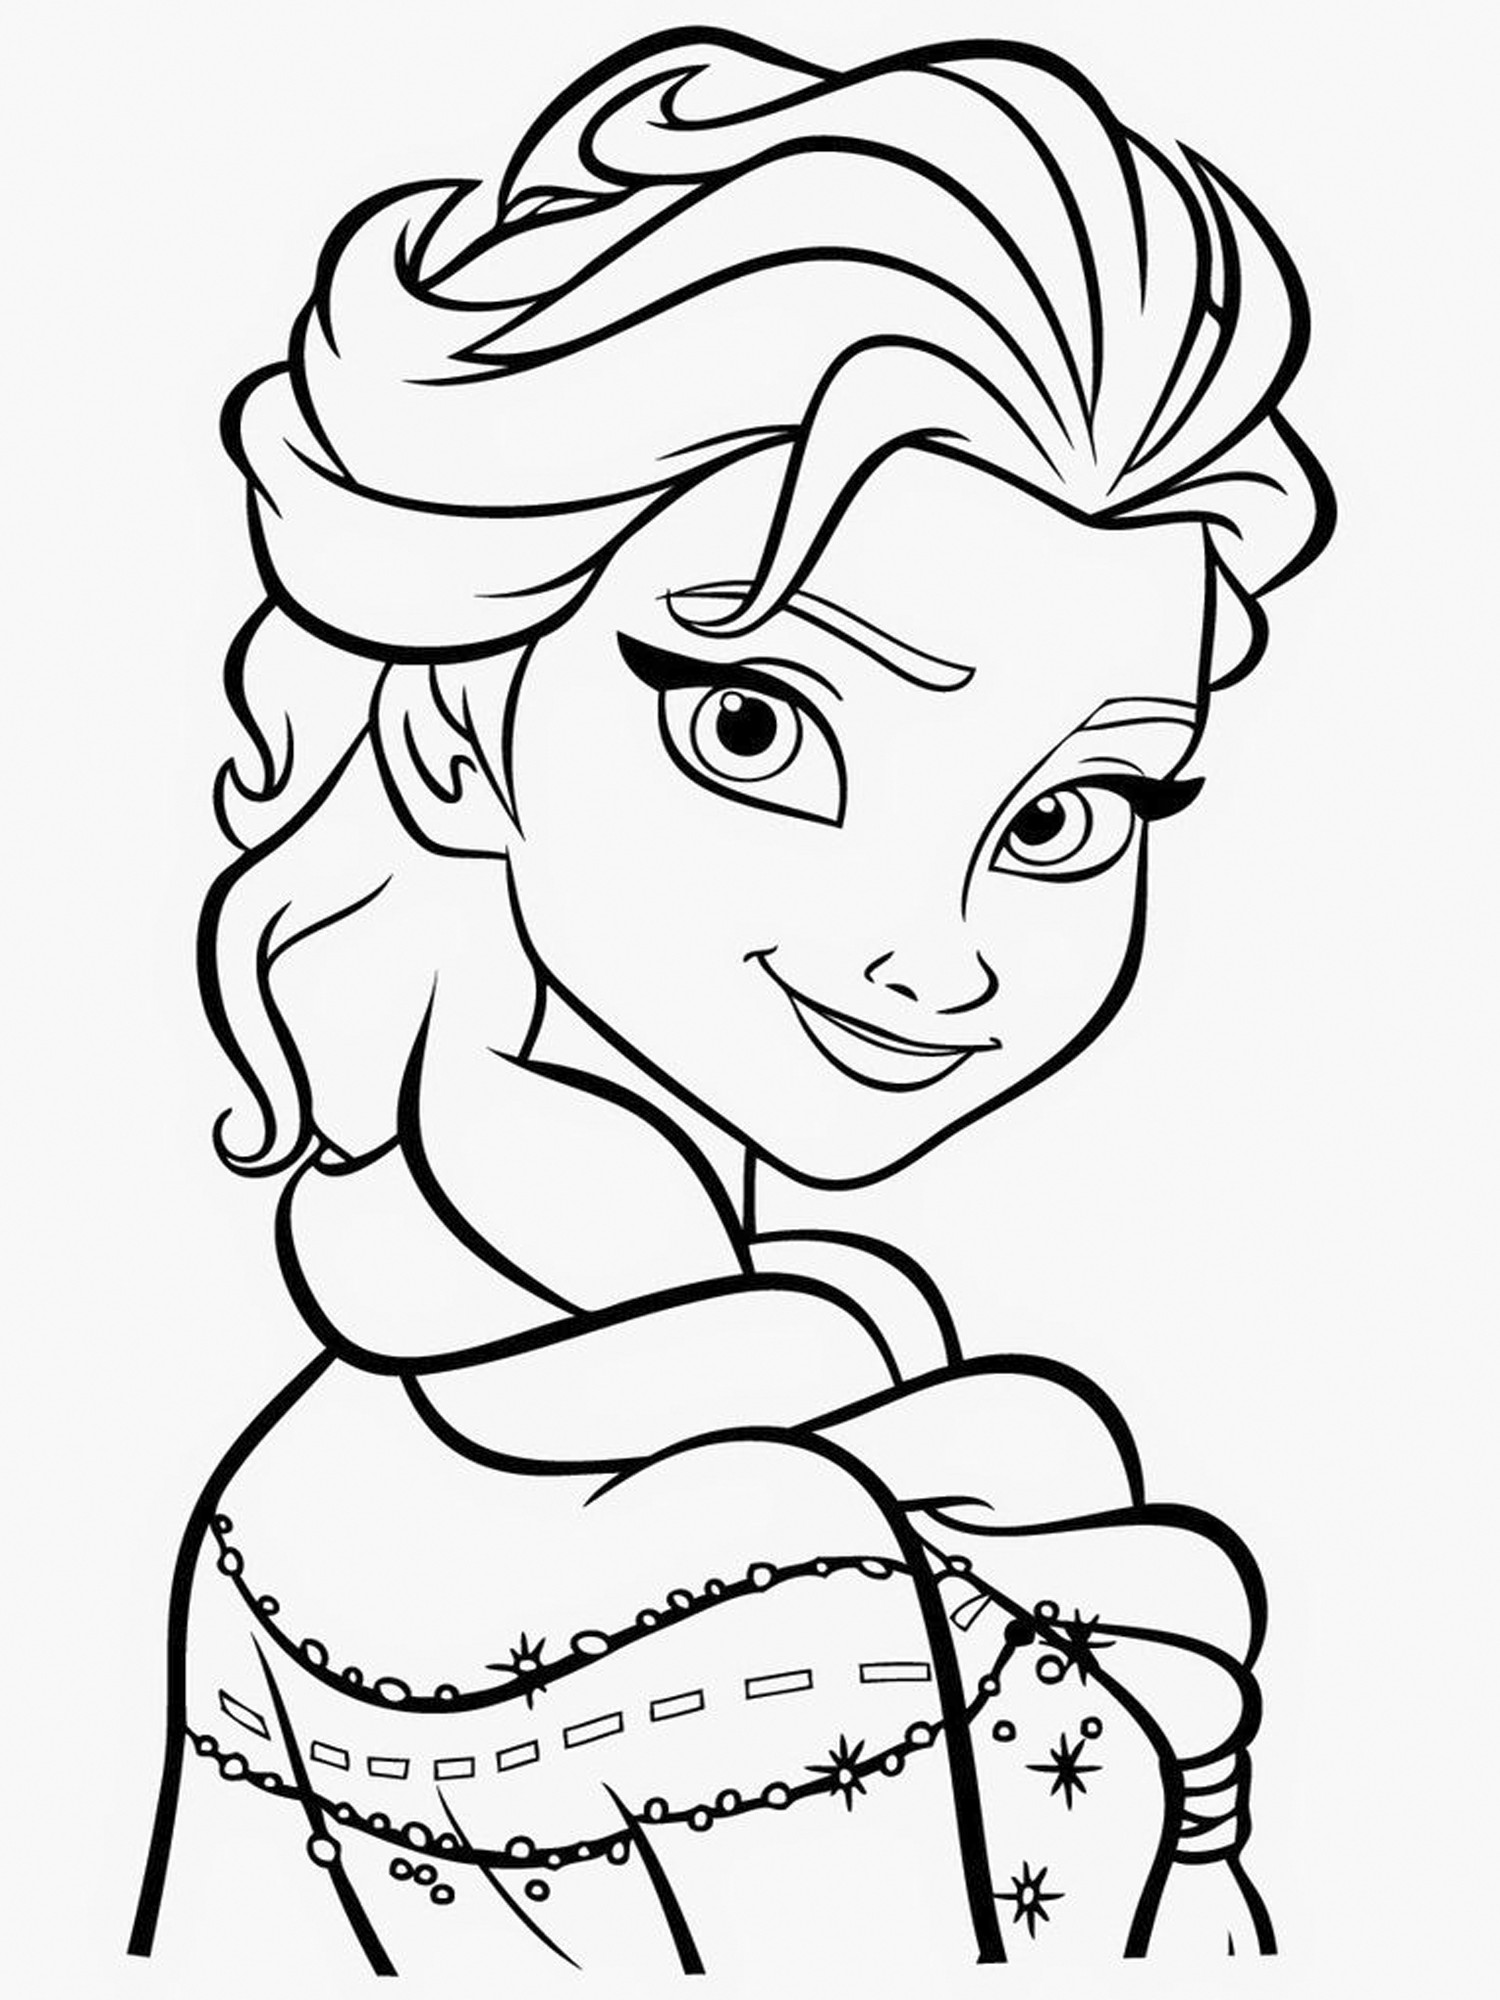 Coloring Pages For Kids Frozen
 Frozen Drawing For Kids at GetDrawings